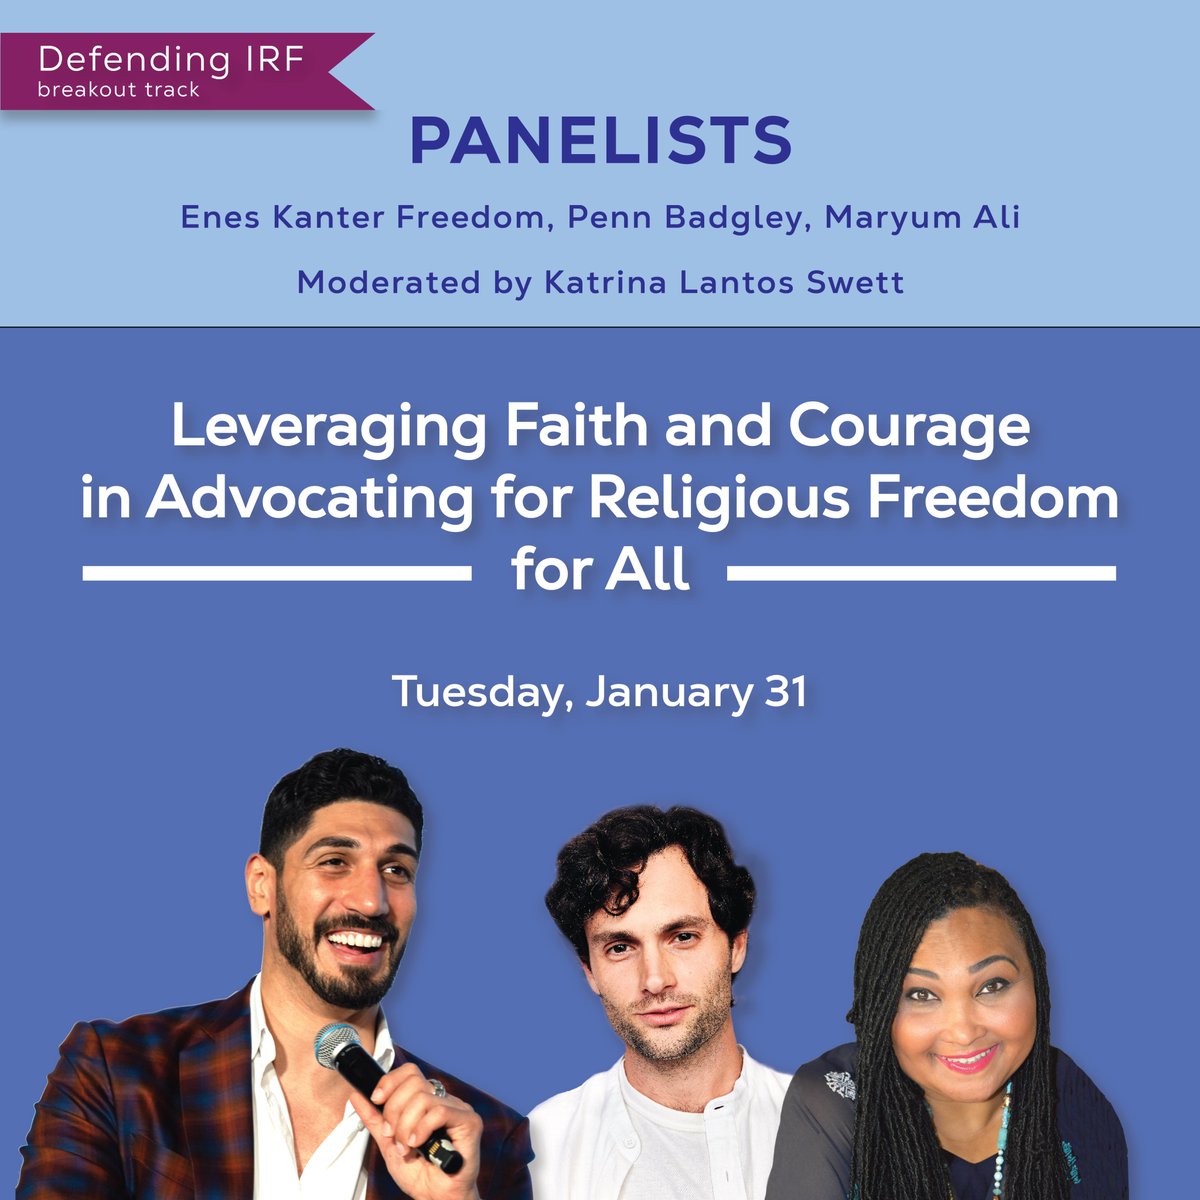 A trio of high-profile figures from the world of sports and entertainment will join #IRFSummit2023! @PennBadgley @EnesFreedom @maryum7 They will appear on a panel on 1/31 in the Defending IRF Breakout Track. Don't miss out, register to attend! irfsummit.org